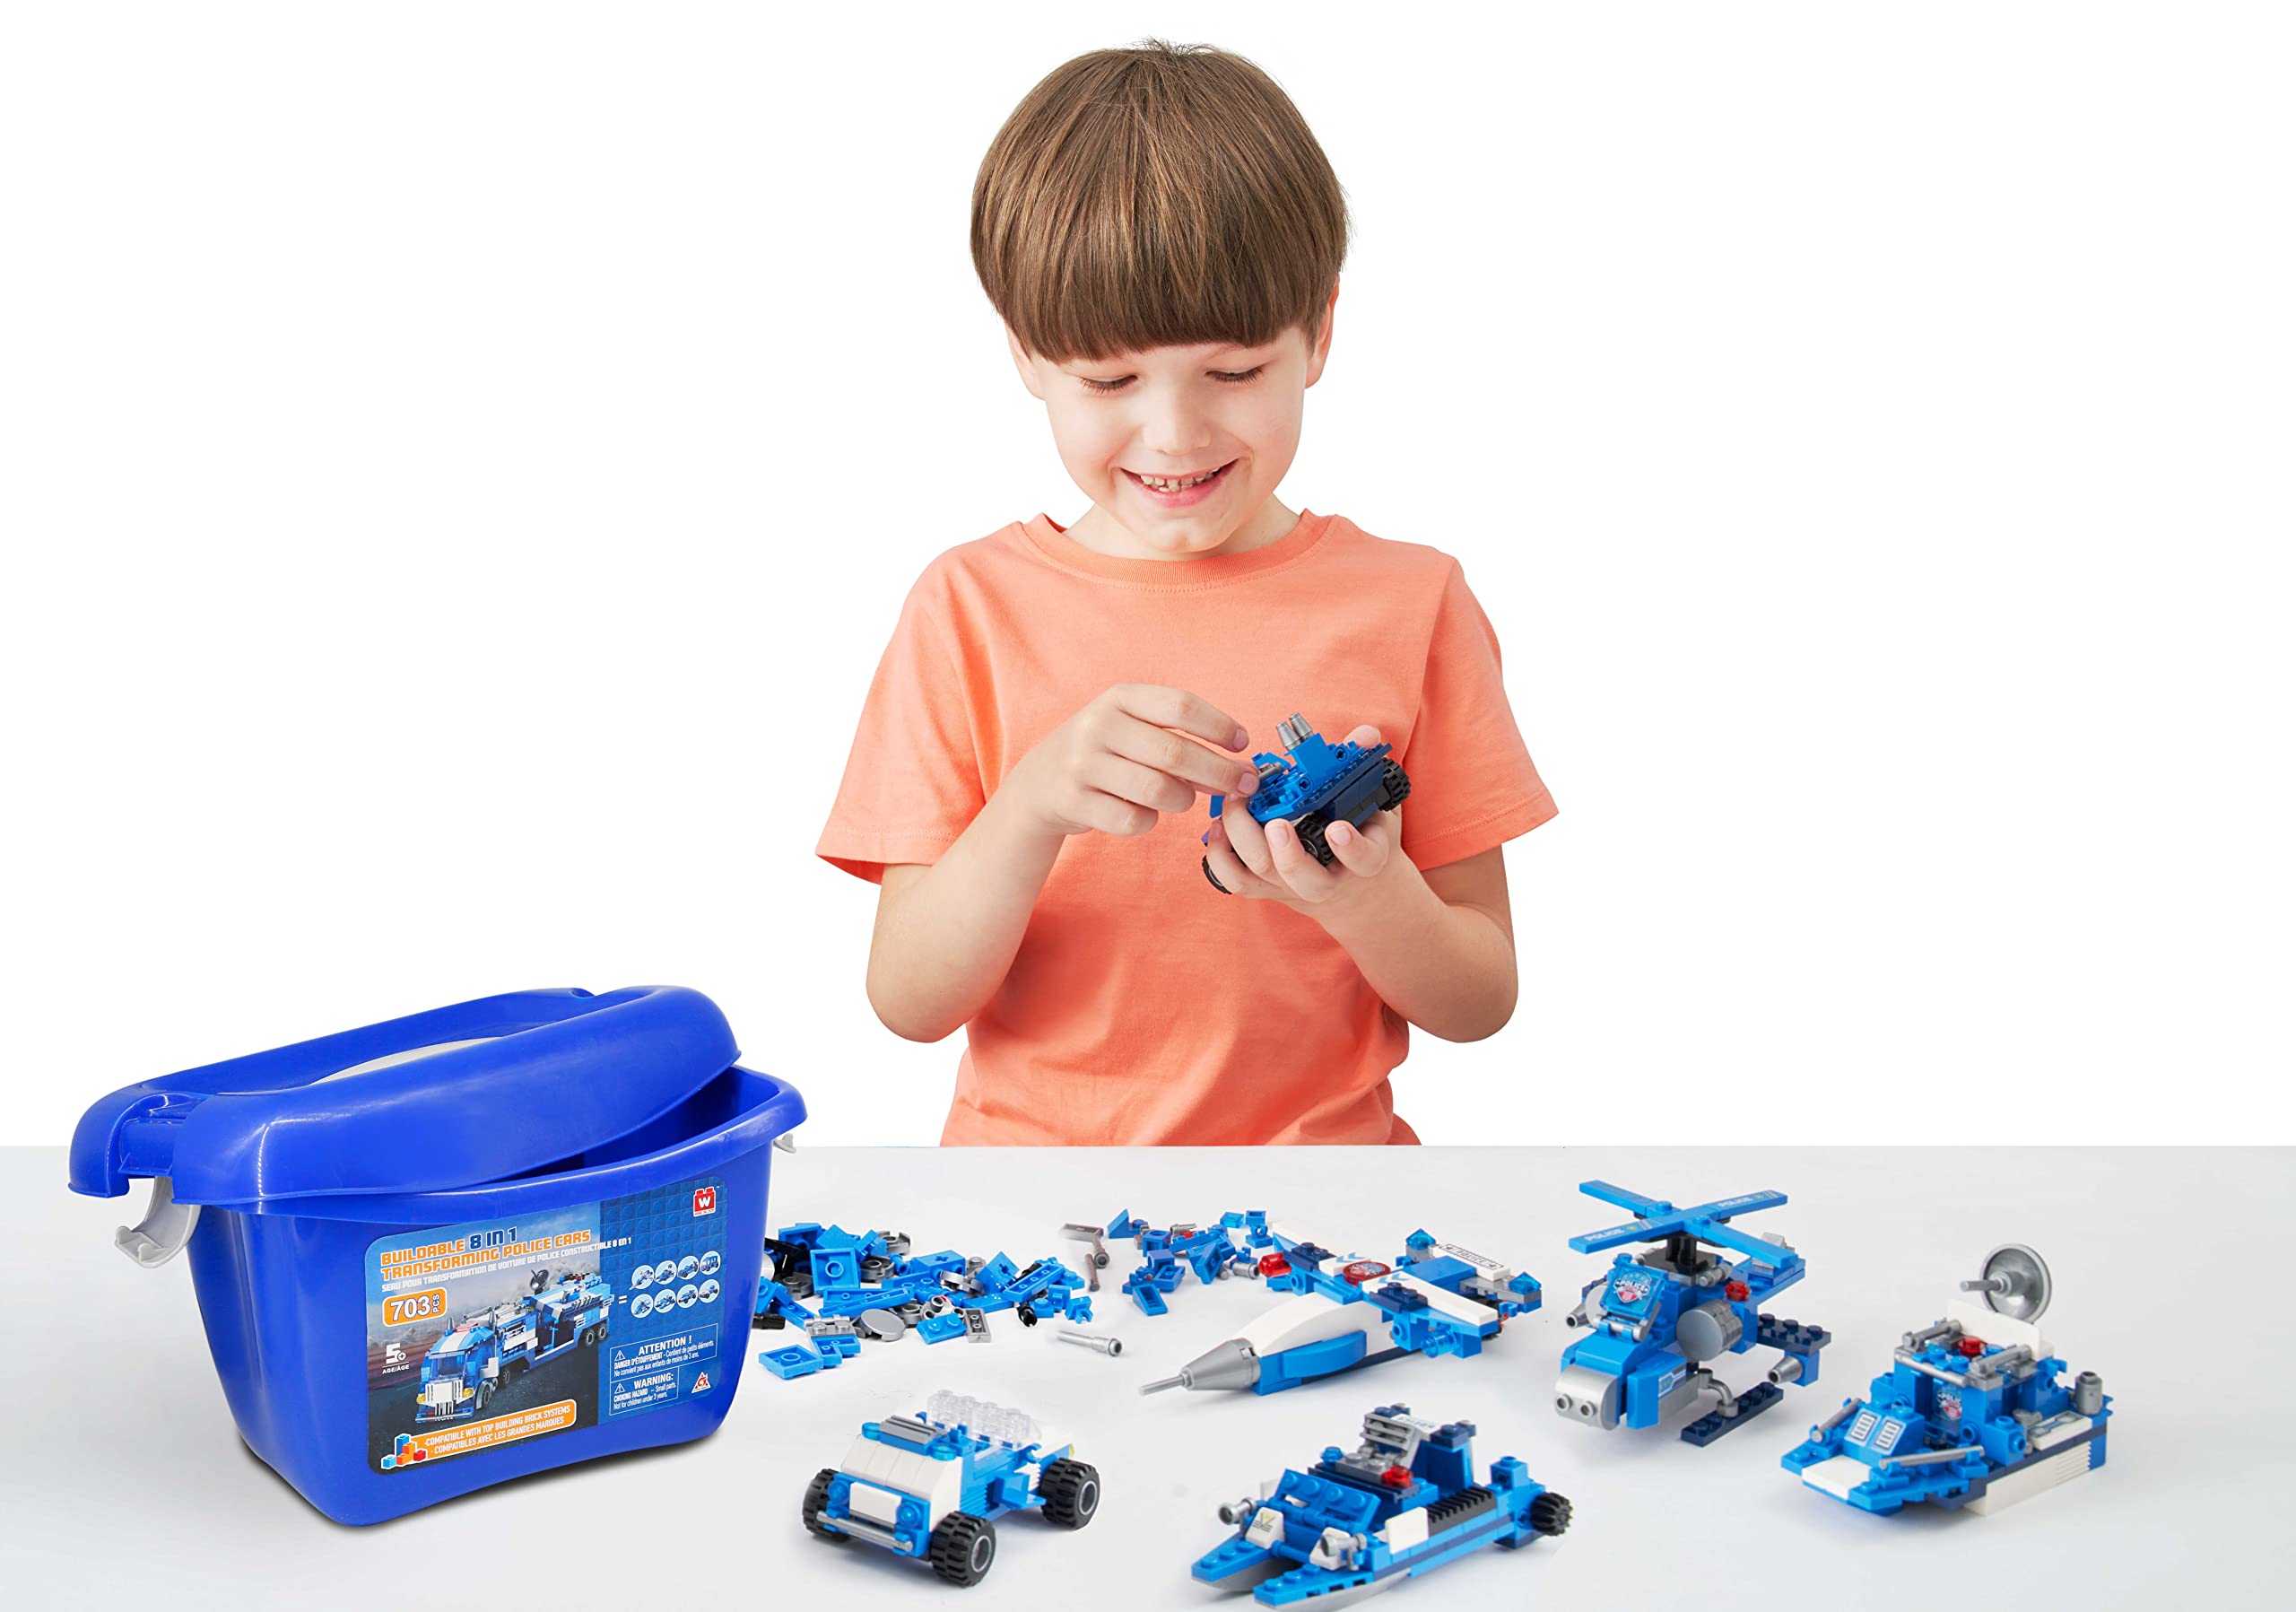 Wise Block Building Set - 8 in 1 Police Command Bucket Value Set - 703 Piece Kit - Compatible with Lego and Other Leading Brands